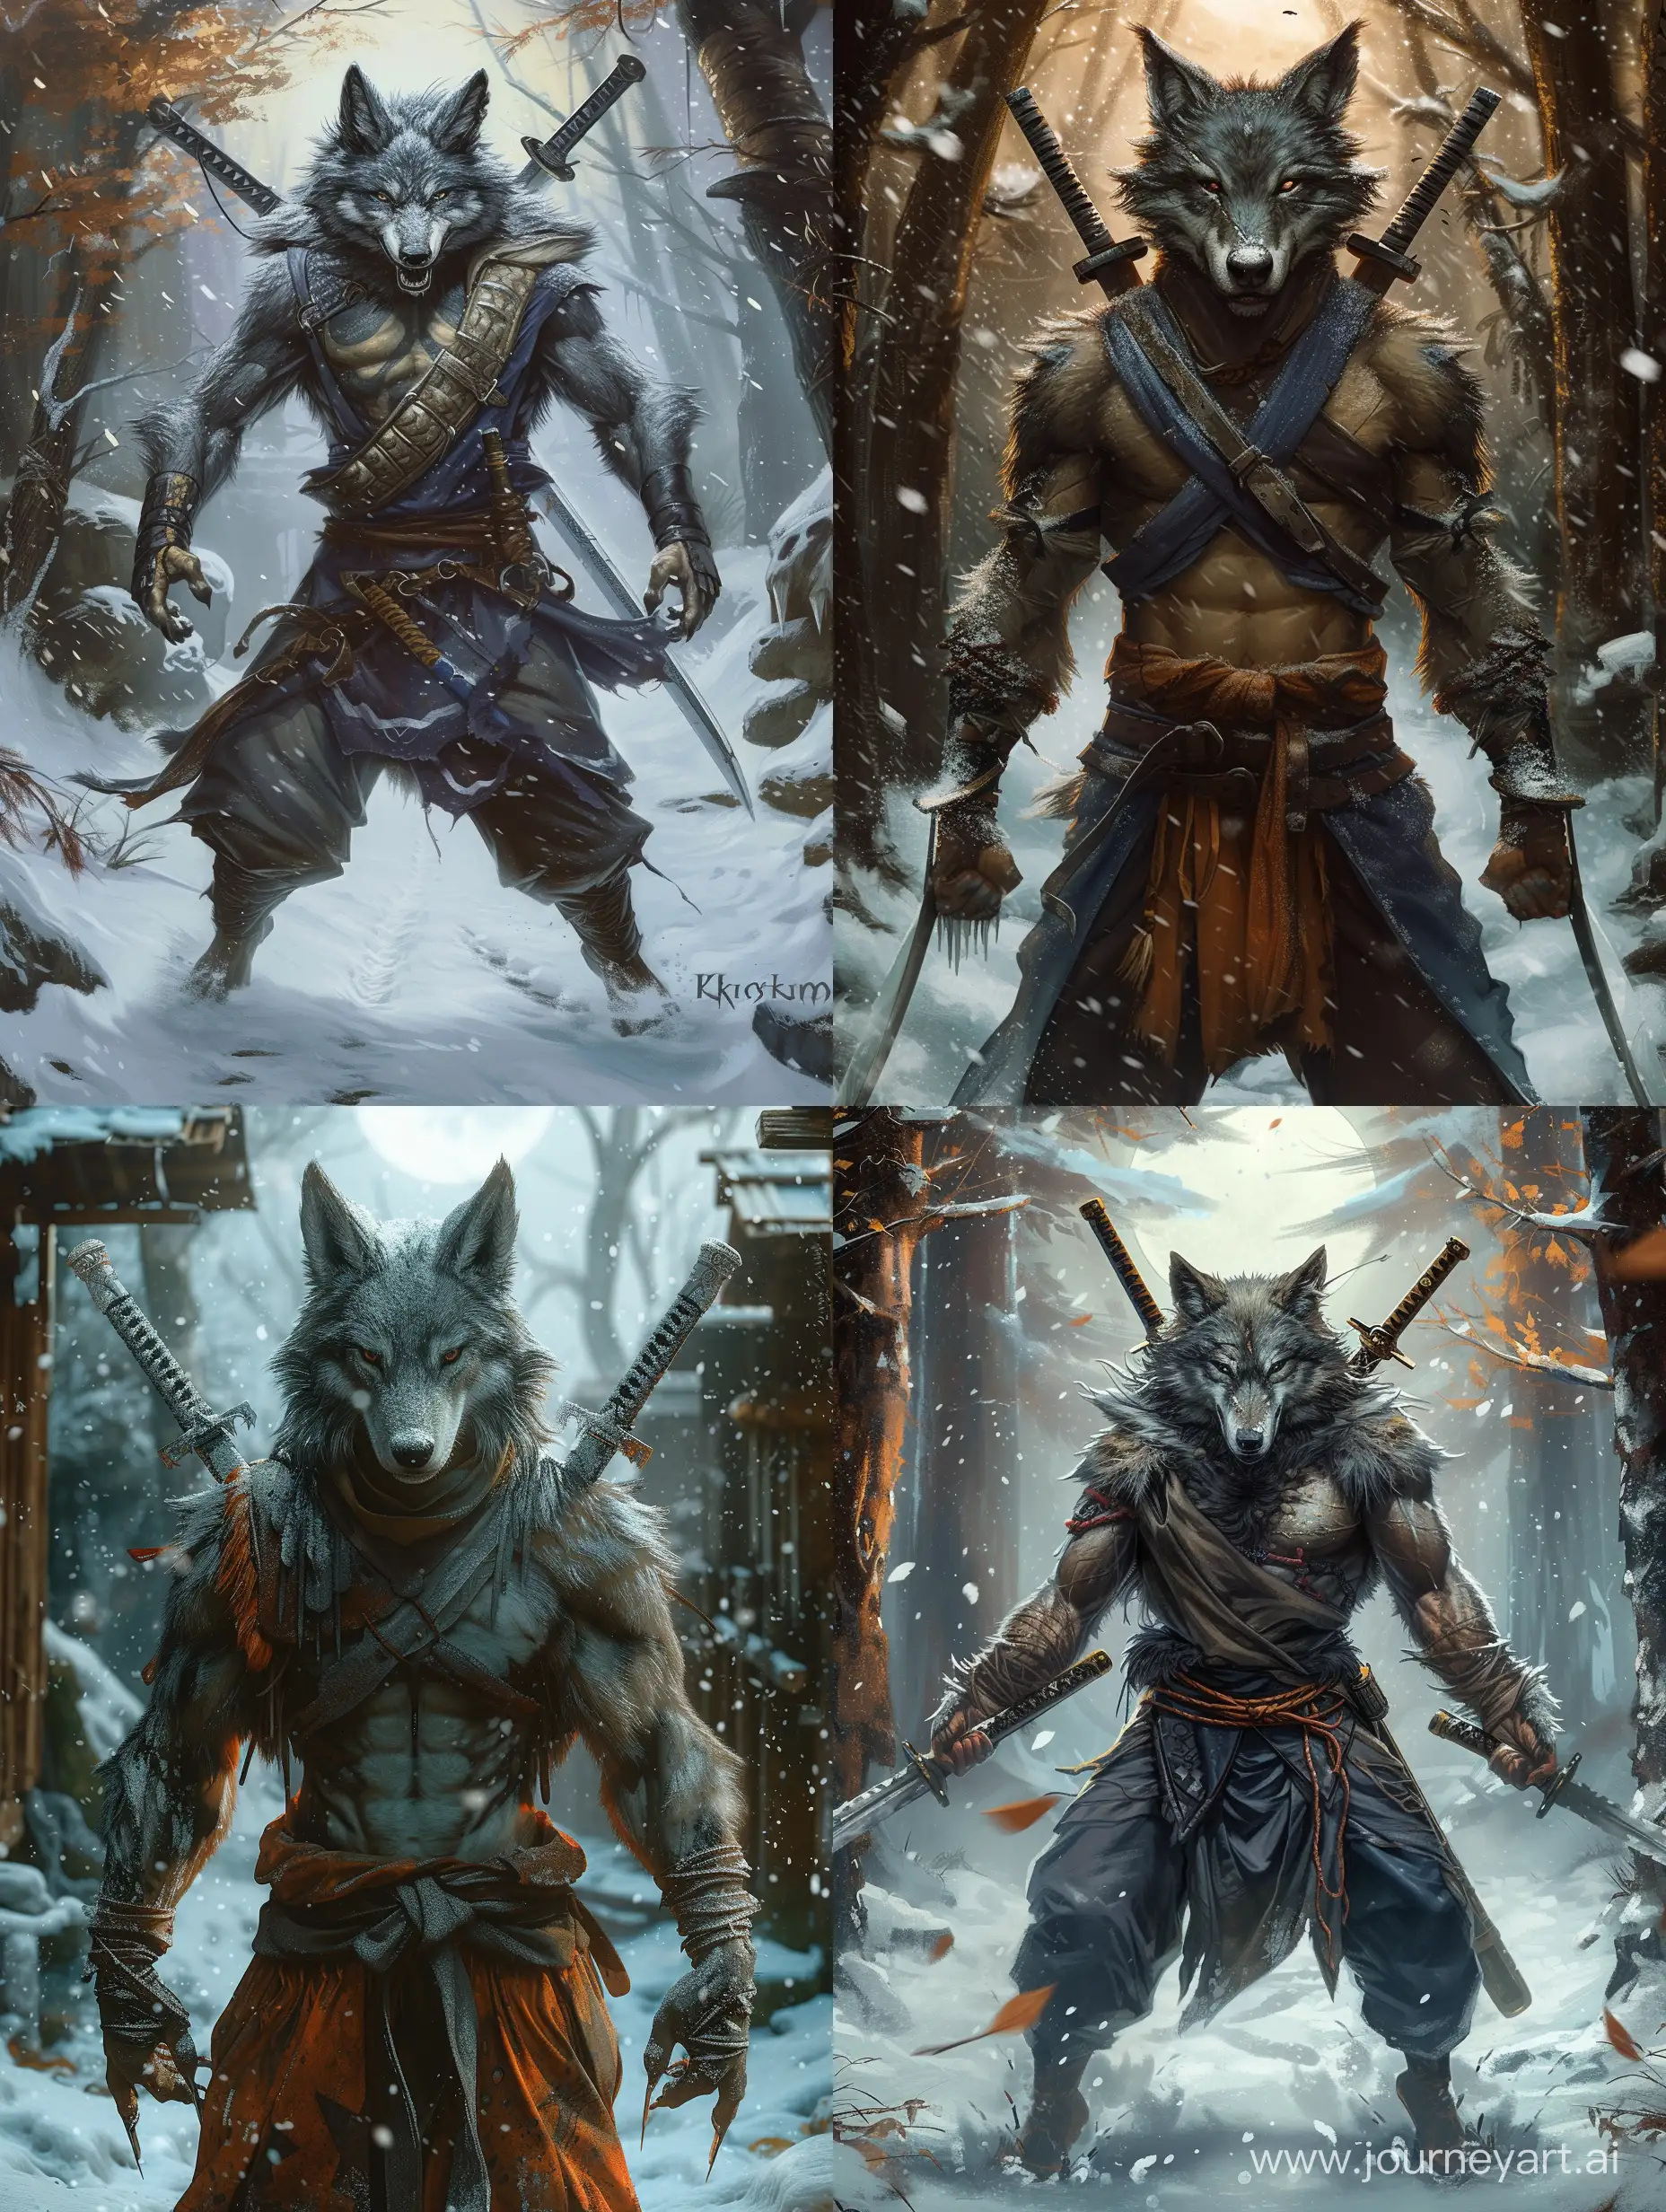 anthropomorphic wolf warrior,The leader of the wolves,two swords on his back,empty hands,in snow,amidst a rustic forest setting dappled with the soft light of a harvest moon,fierce,Detailed clothing.incredible detail,terrifying.